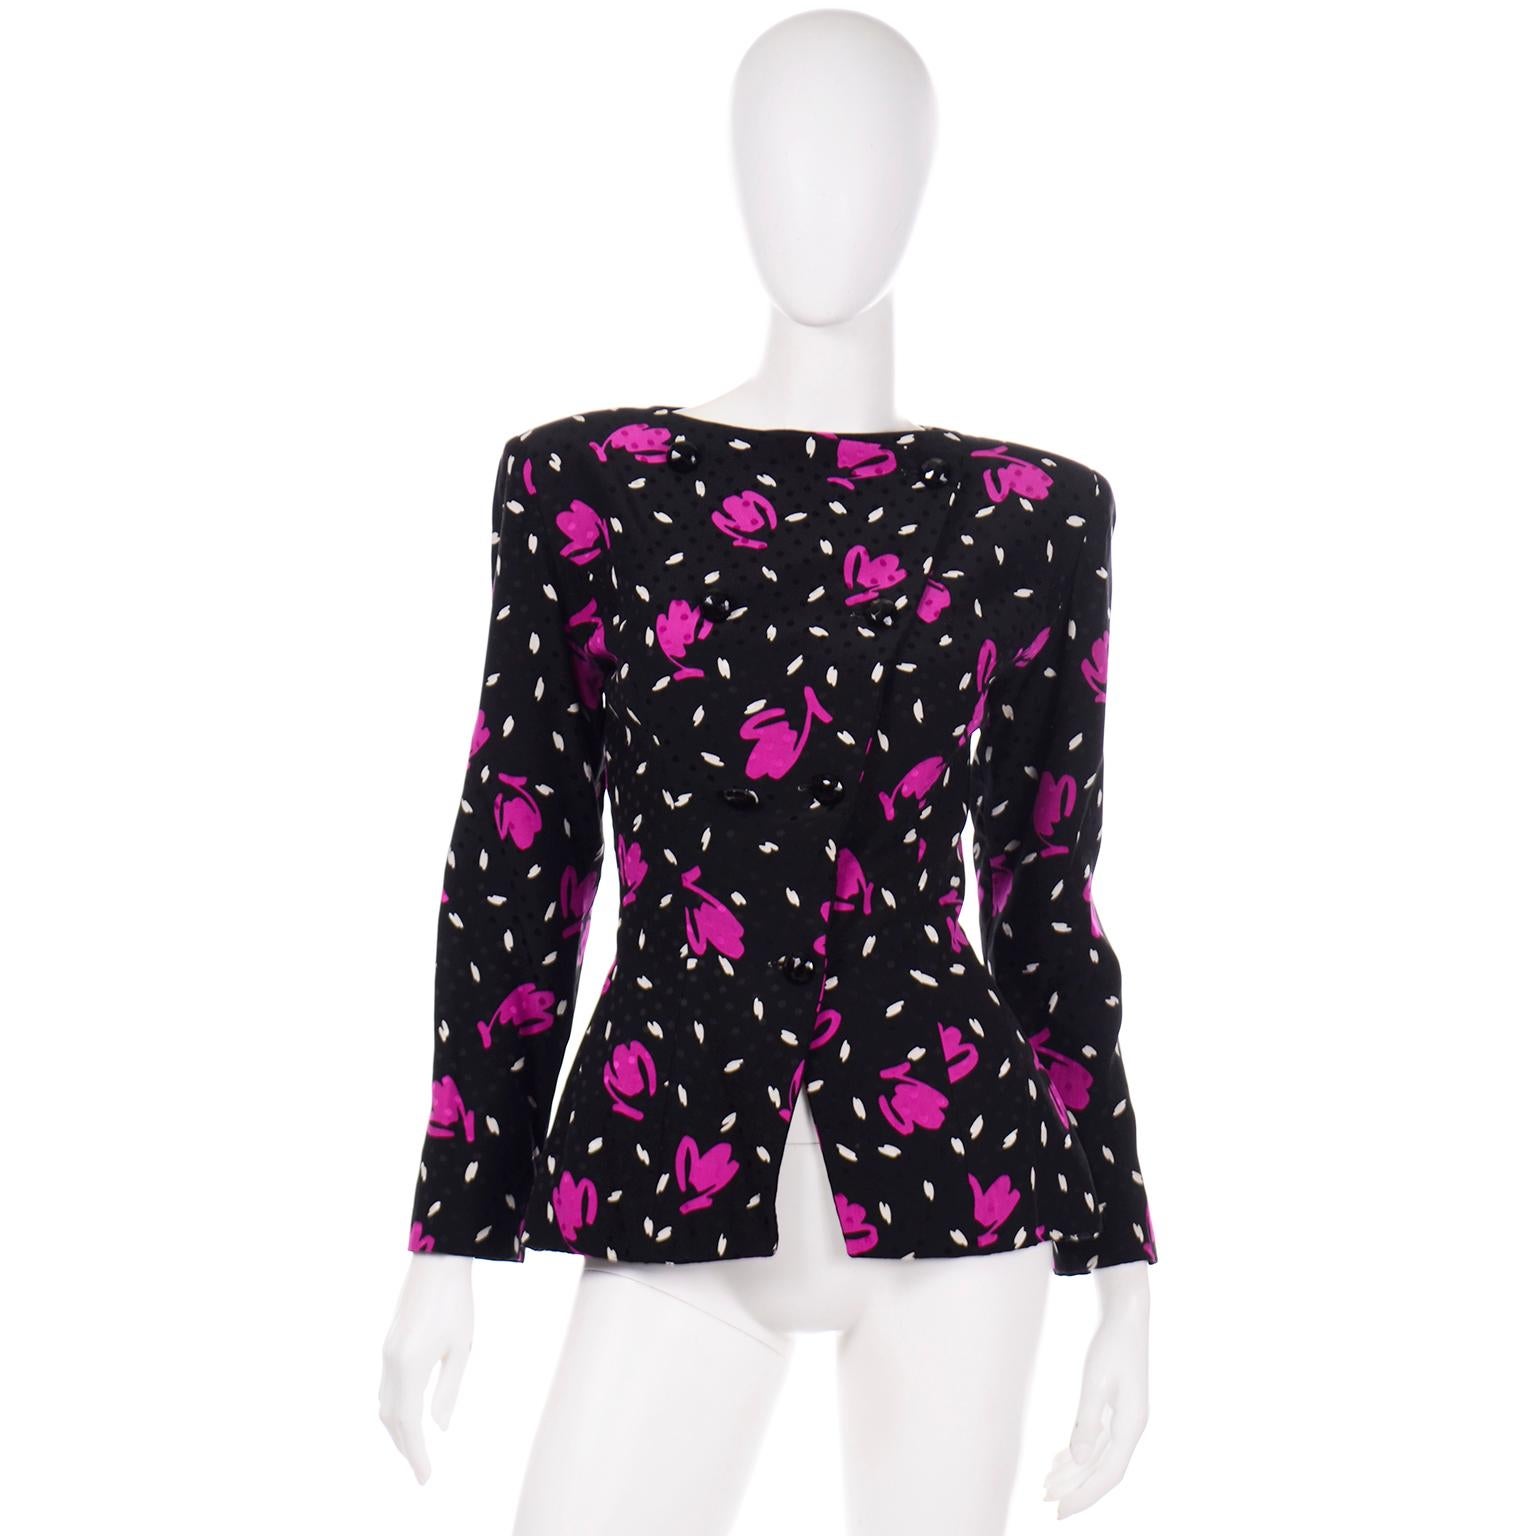 This is a really lovely vintage silk jacket style top from Vicky Tiel Couture in a deep midnight blue tonal dot silk with an abstract pink and white floral design. The top has Tiel's signature fitted waist, creating a slight peplum effect, and